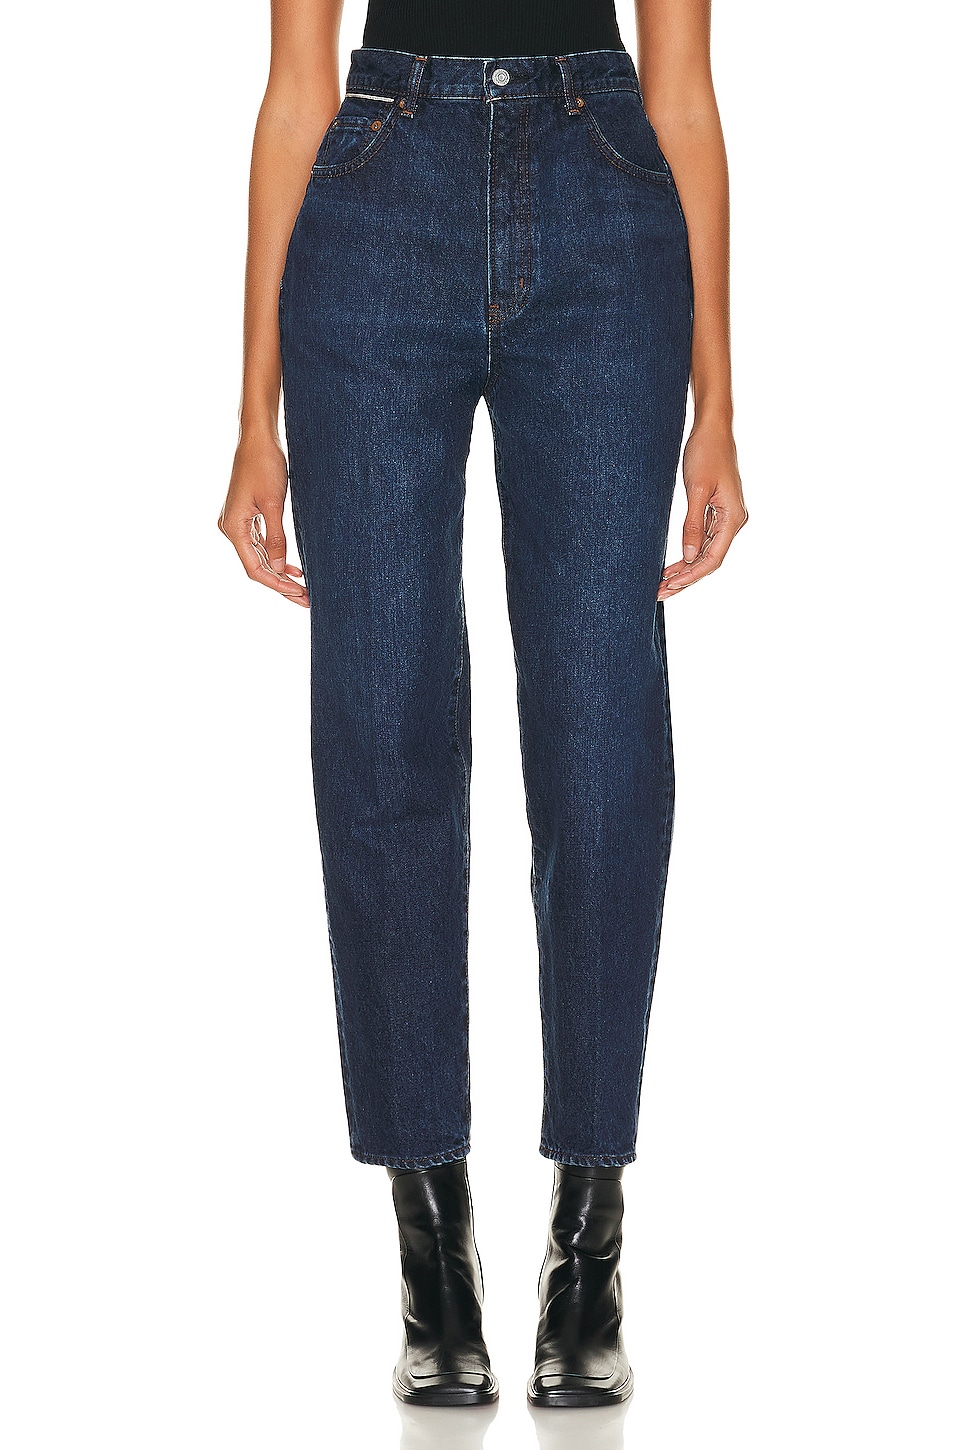 Image 1 of Moussy Vintage Toolville Carrot Pant in Dark Blue